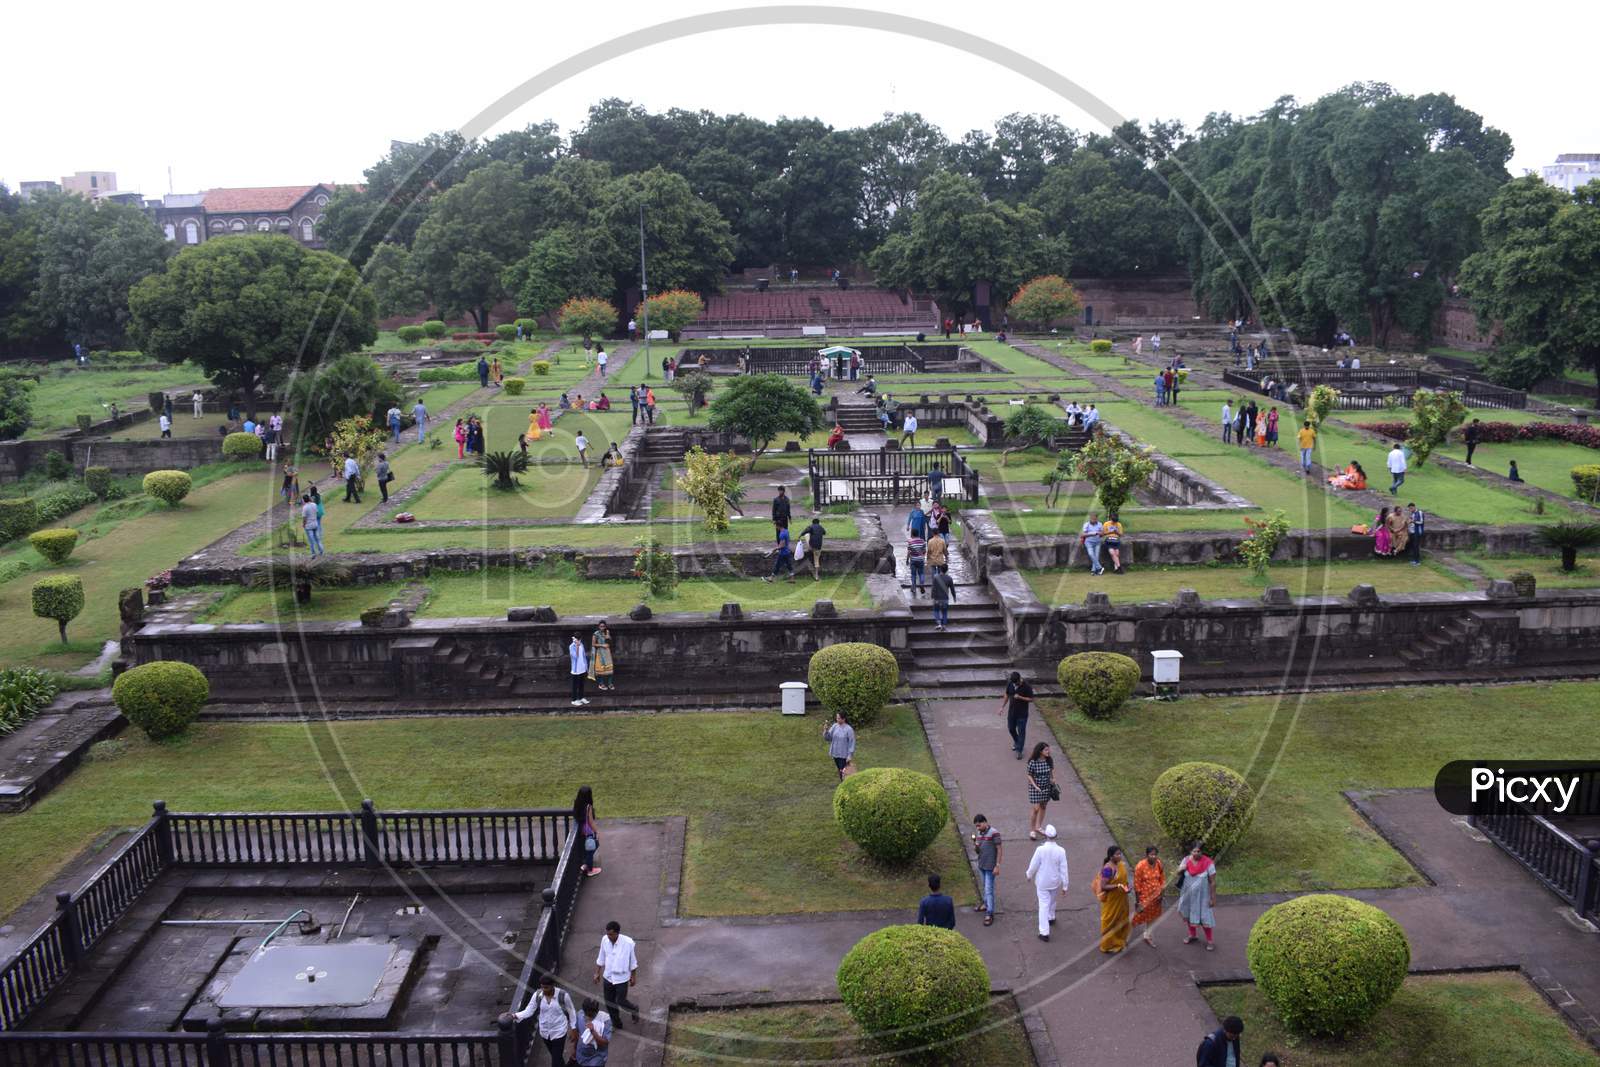 Full interior of shaniwarwada from top view